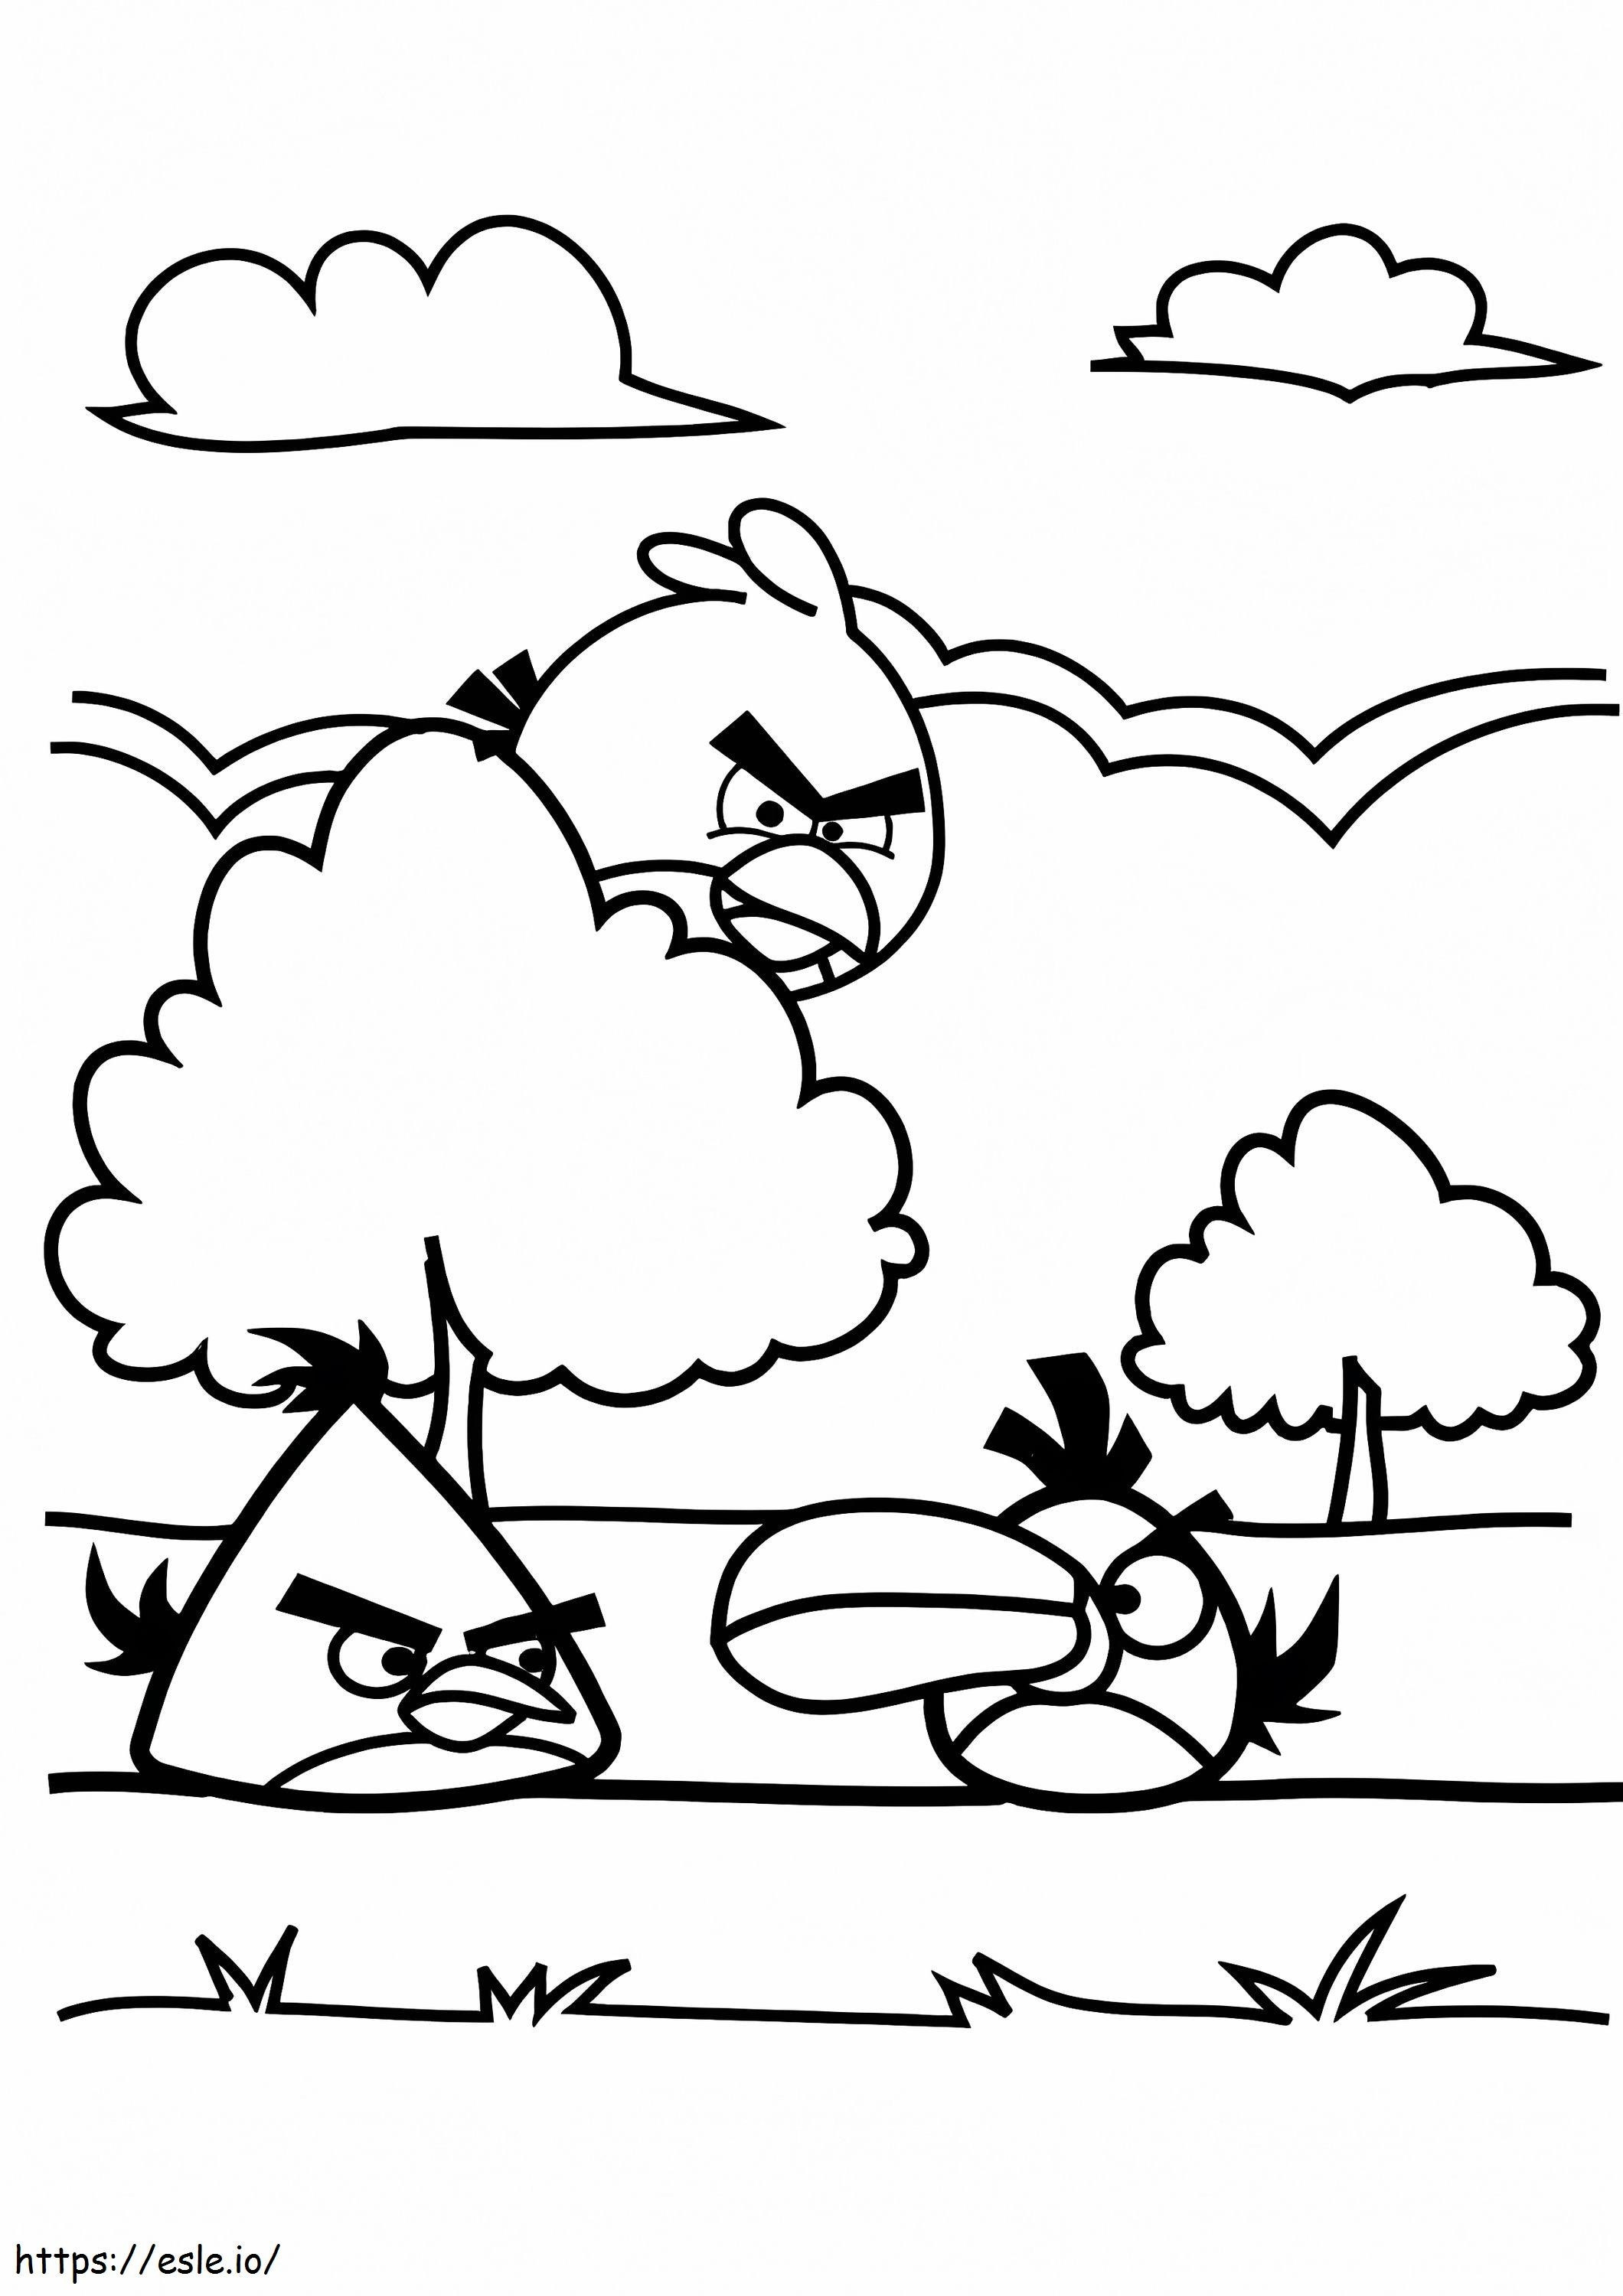 Angry Birds Playing Near A Tree coloring page